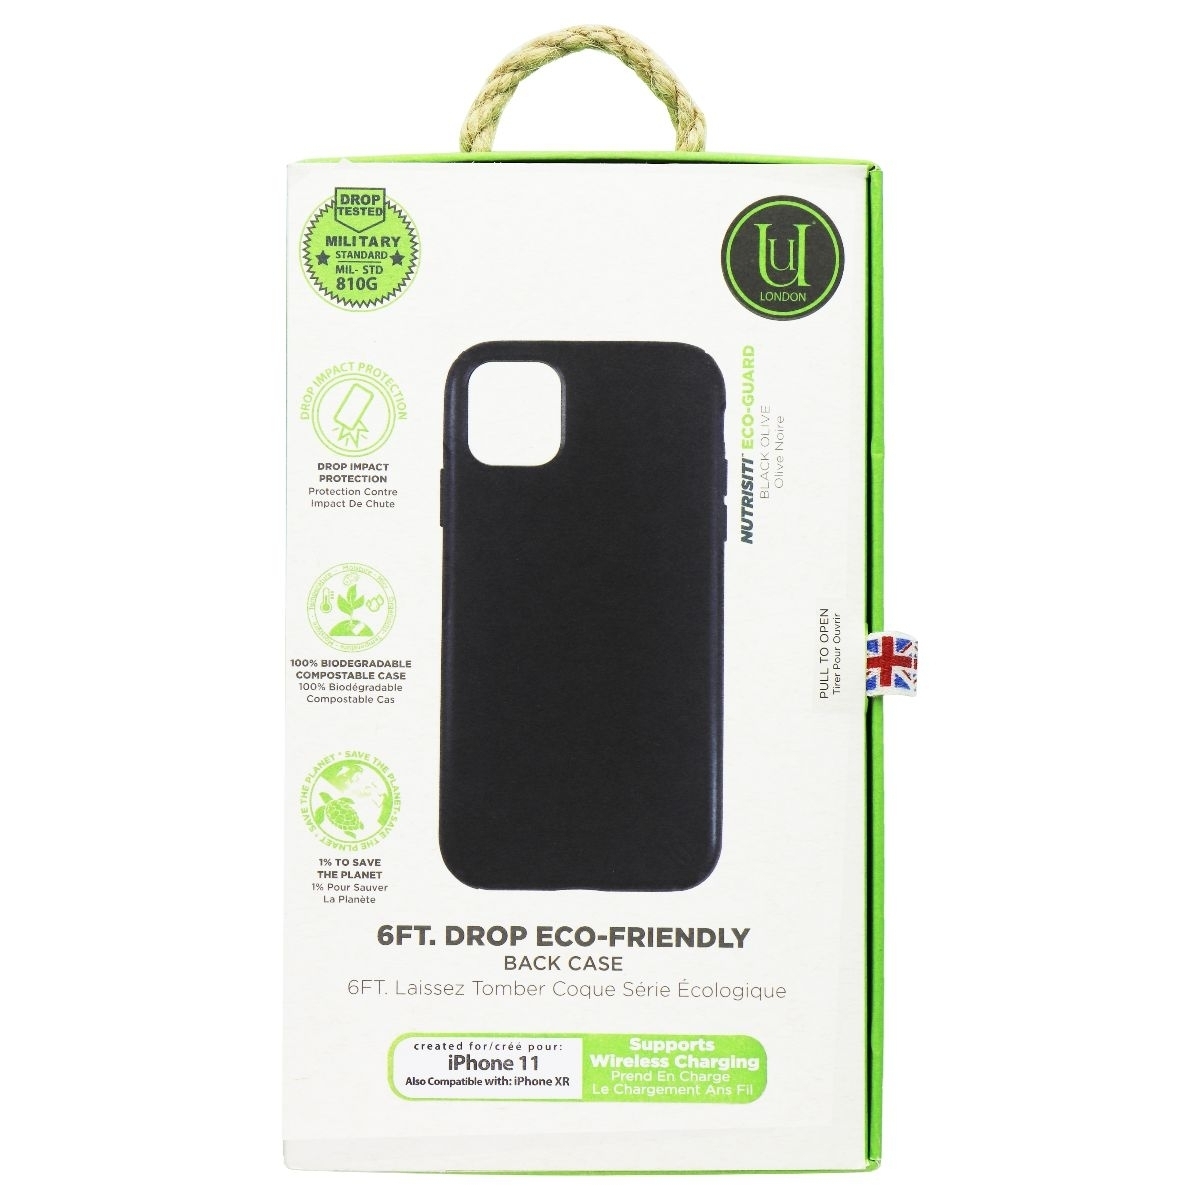 Unique London Eco-Friendly Back Case For Apple IPhone 11 And XR - Black (Refurbished)